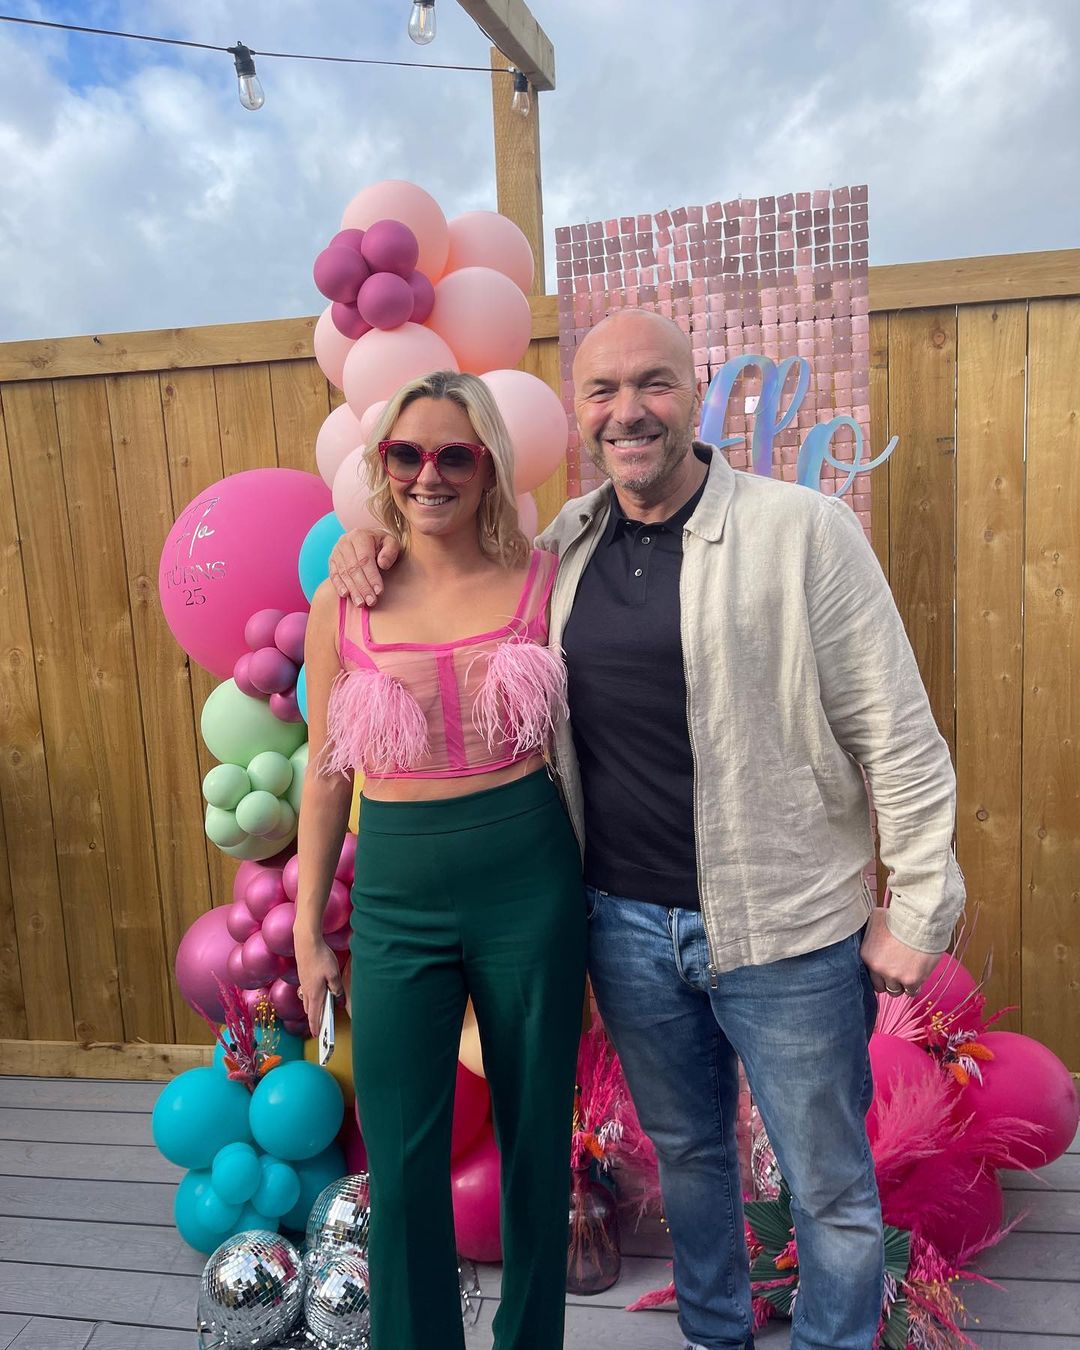 Sunday Brunch’s Simon Rimmer reveals daughter rejected Love Island as he slams show for ‘objectifying women’